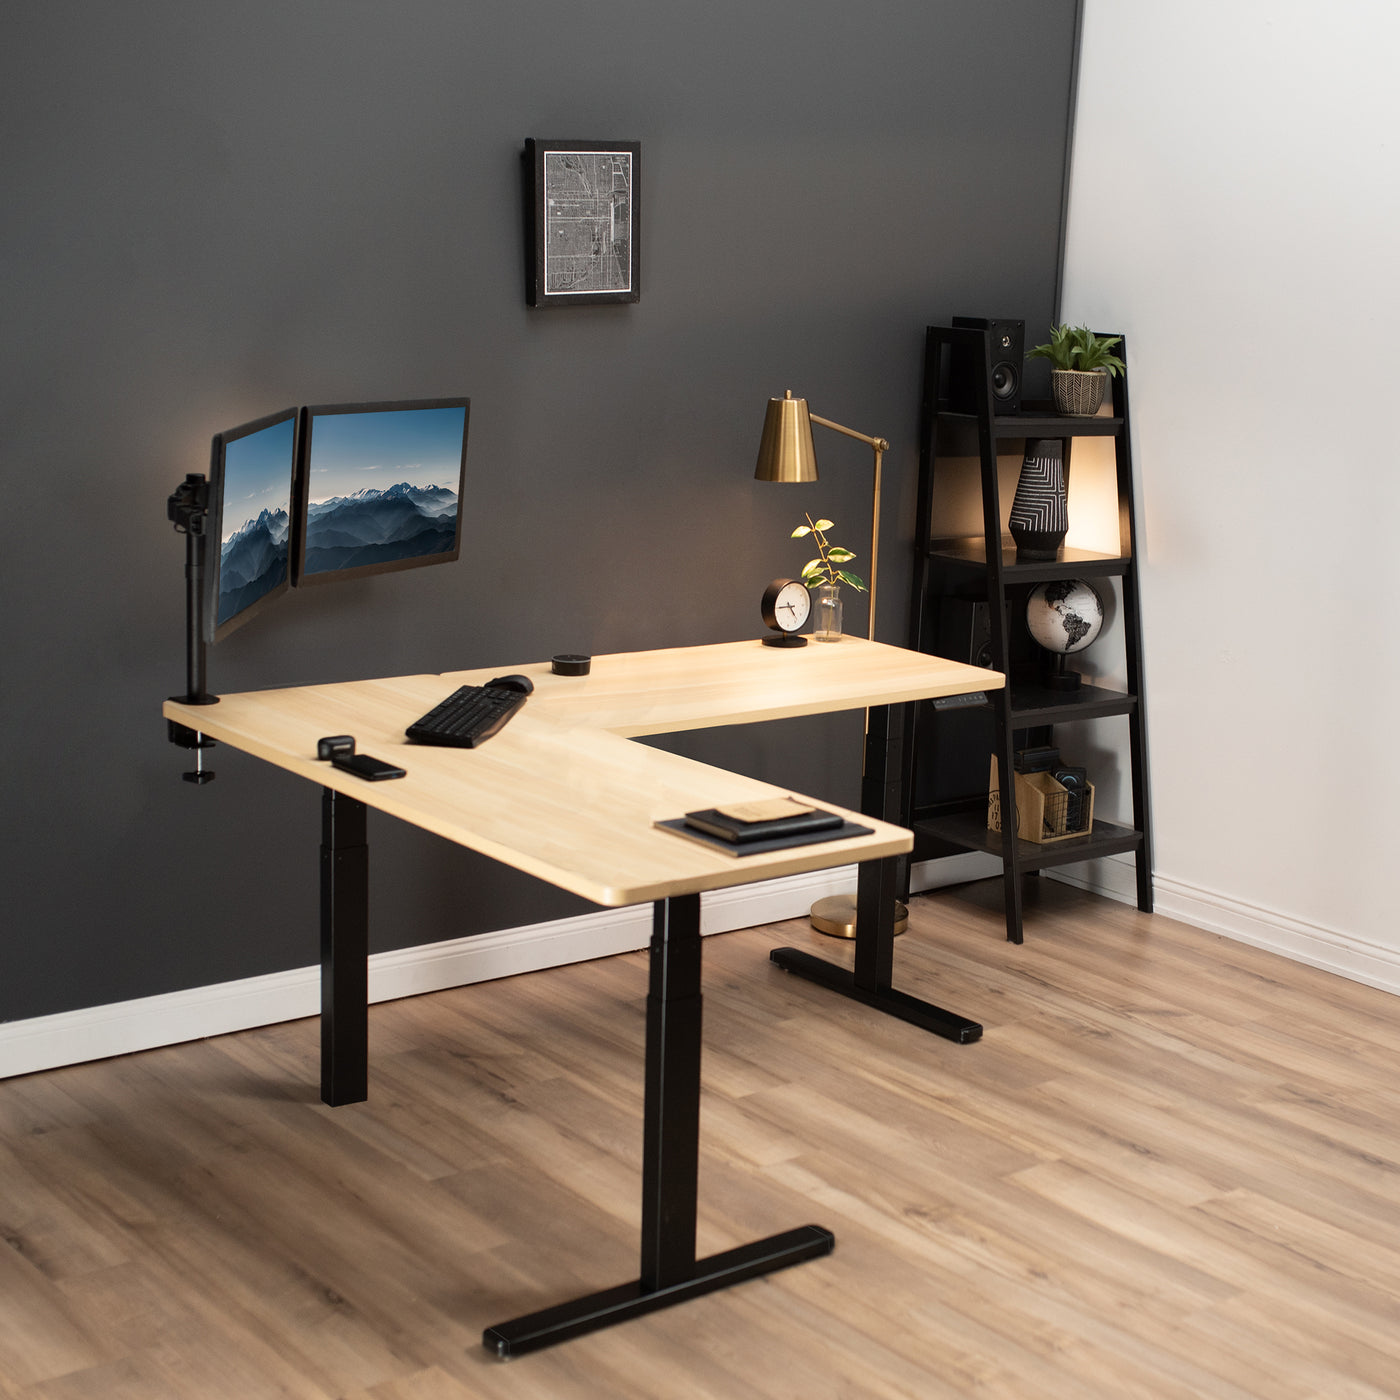 Sit or stand, 3 stage column heavy-duty L-shaped corner desk from VIVO.